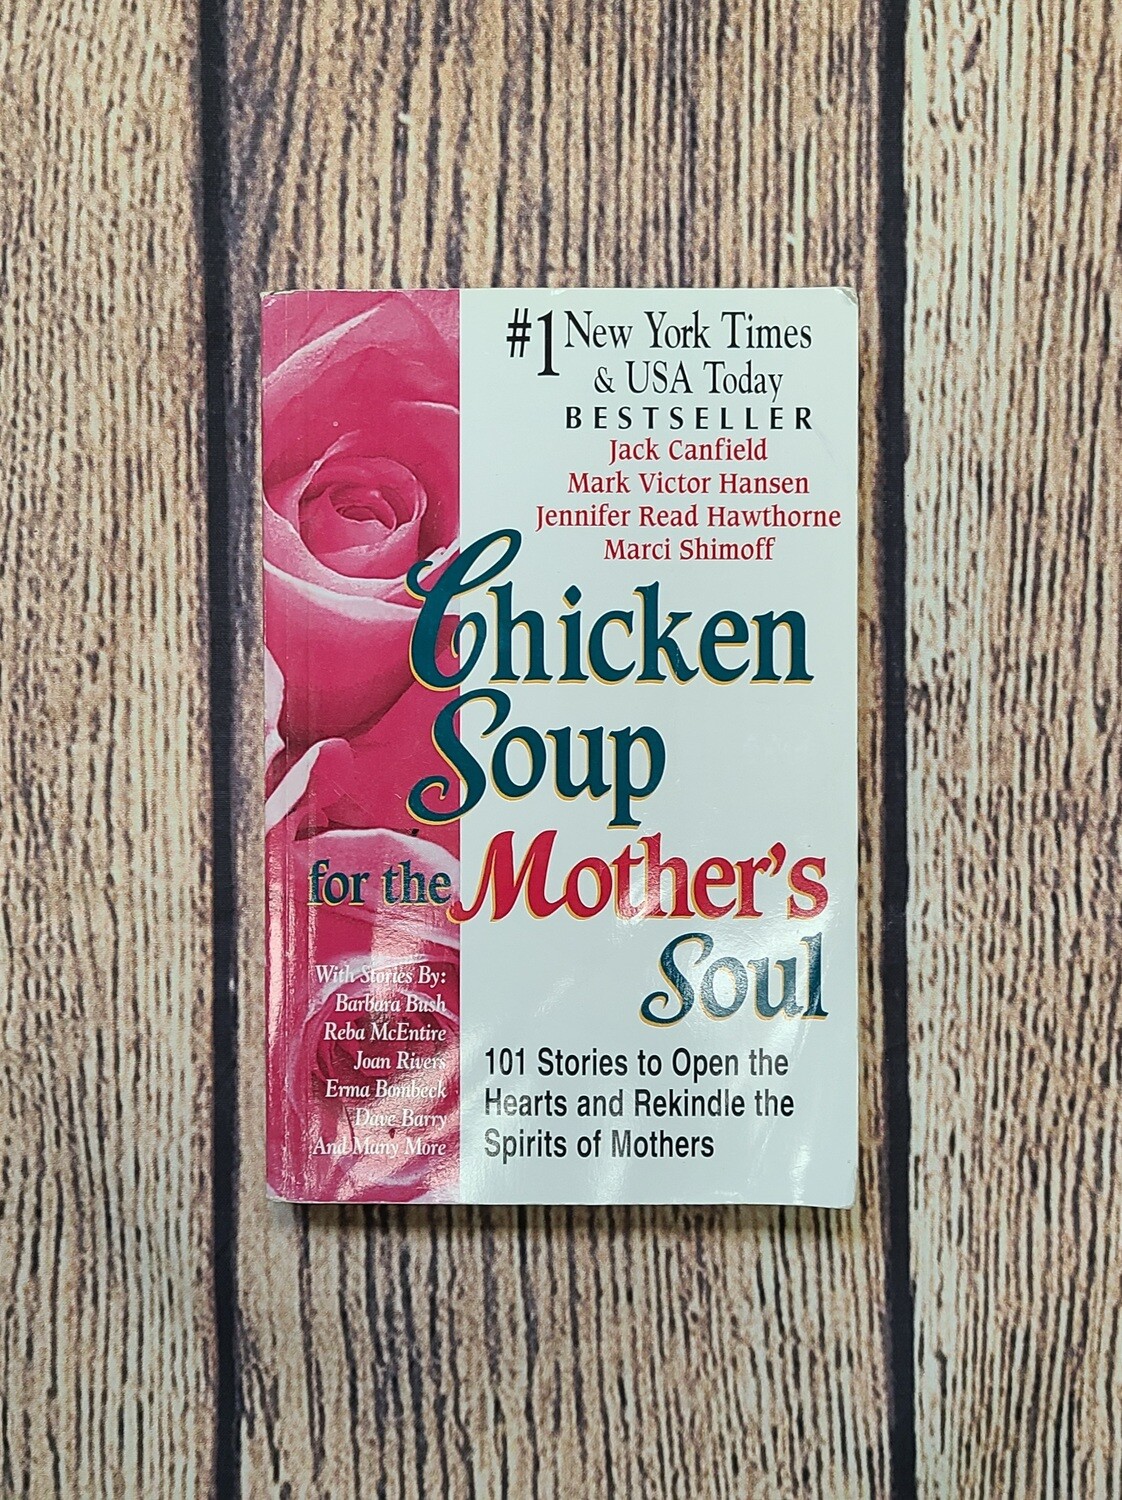 Chicken Soup for the Mother's Soul by Jack Canfield, Mark Victor Hansen, Jennifer Read Hawthorne, & Marci Shimoff